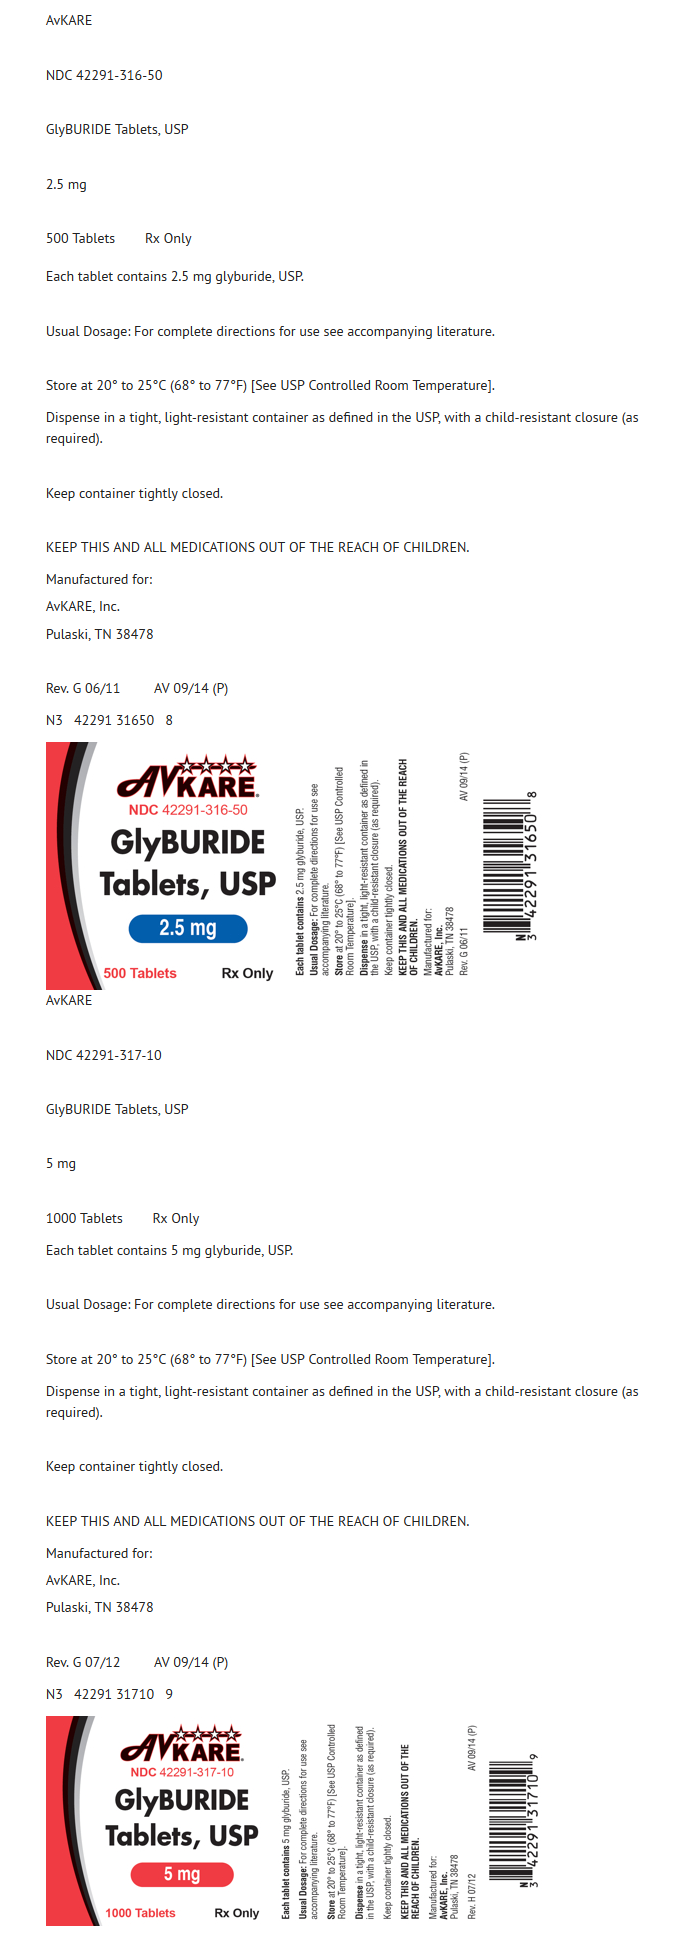 File:Glyburide pdp.png